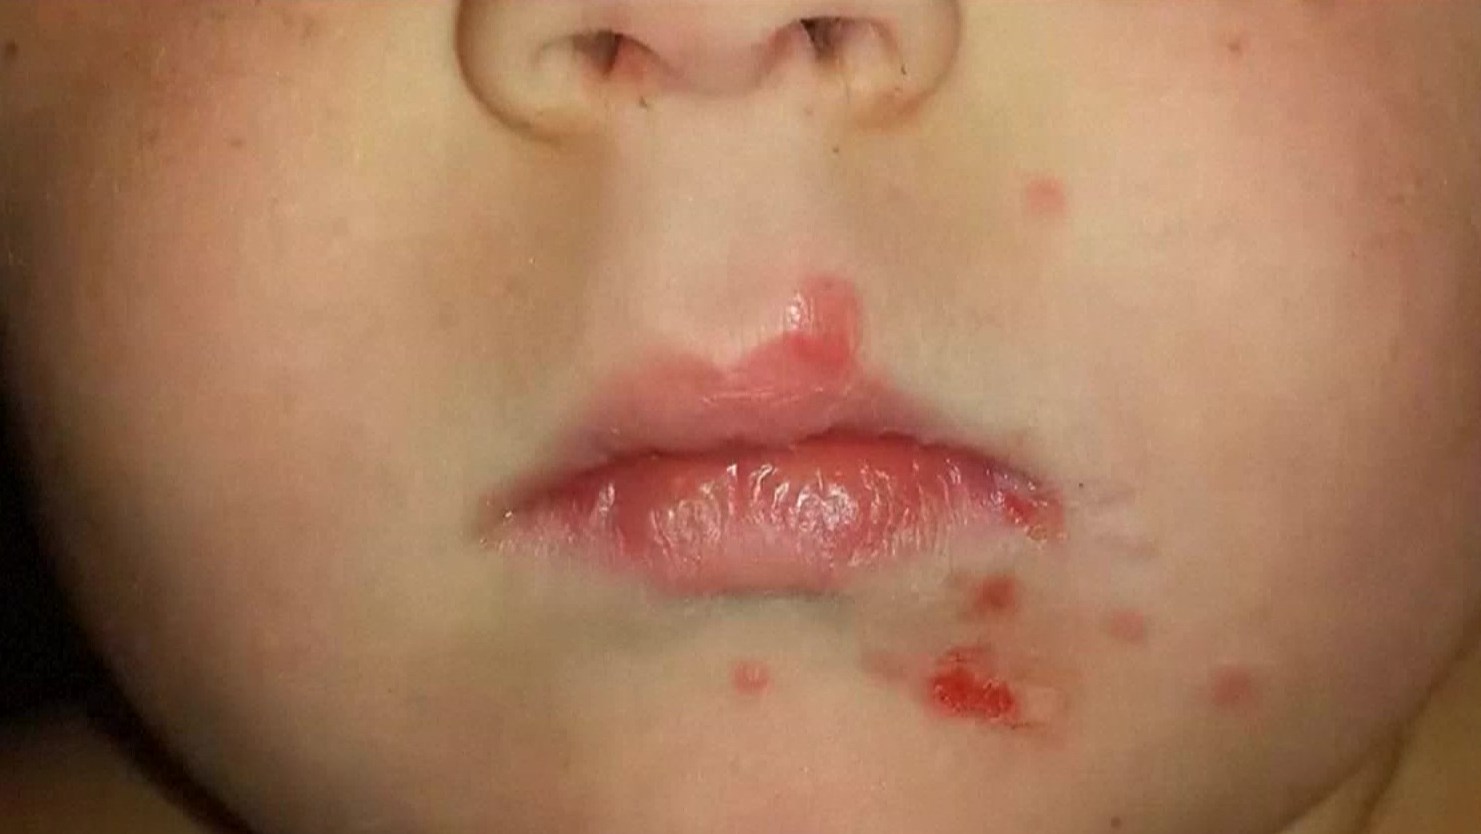 hand foot and mouth disease adults face